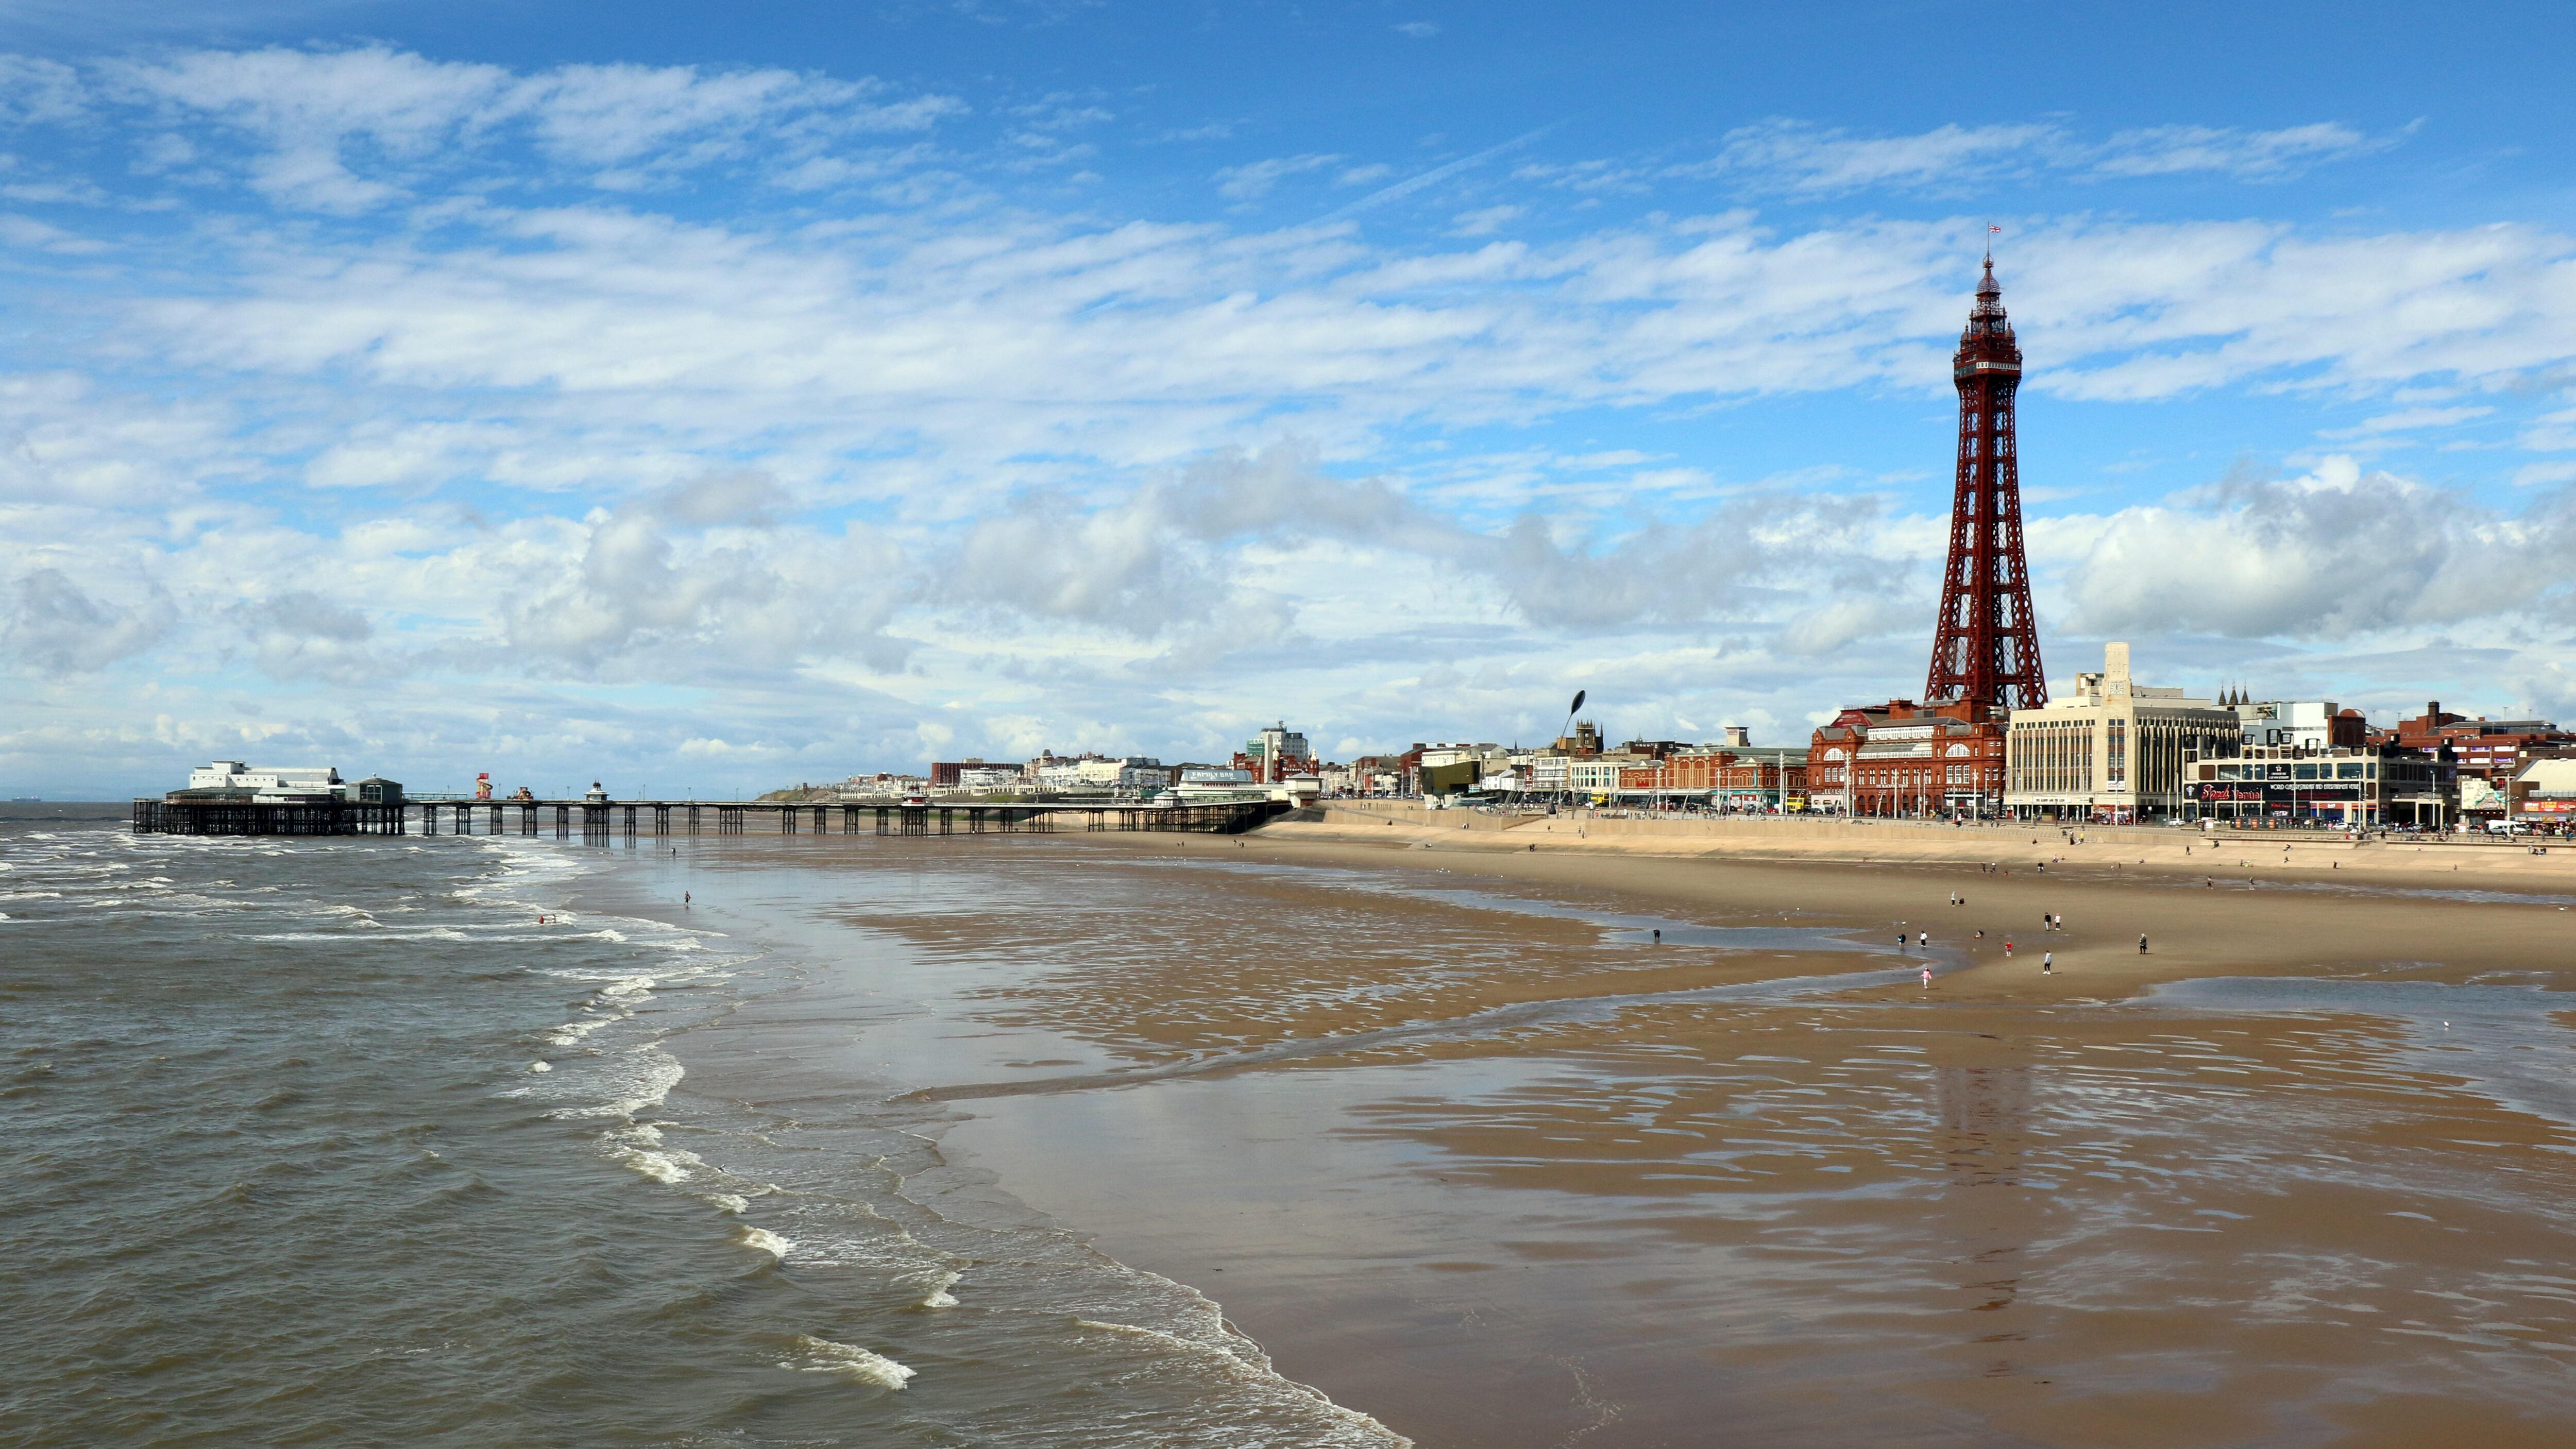 The flames reported at the top of Blackpool Tower were actually orange netting, police said